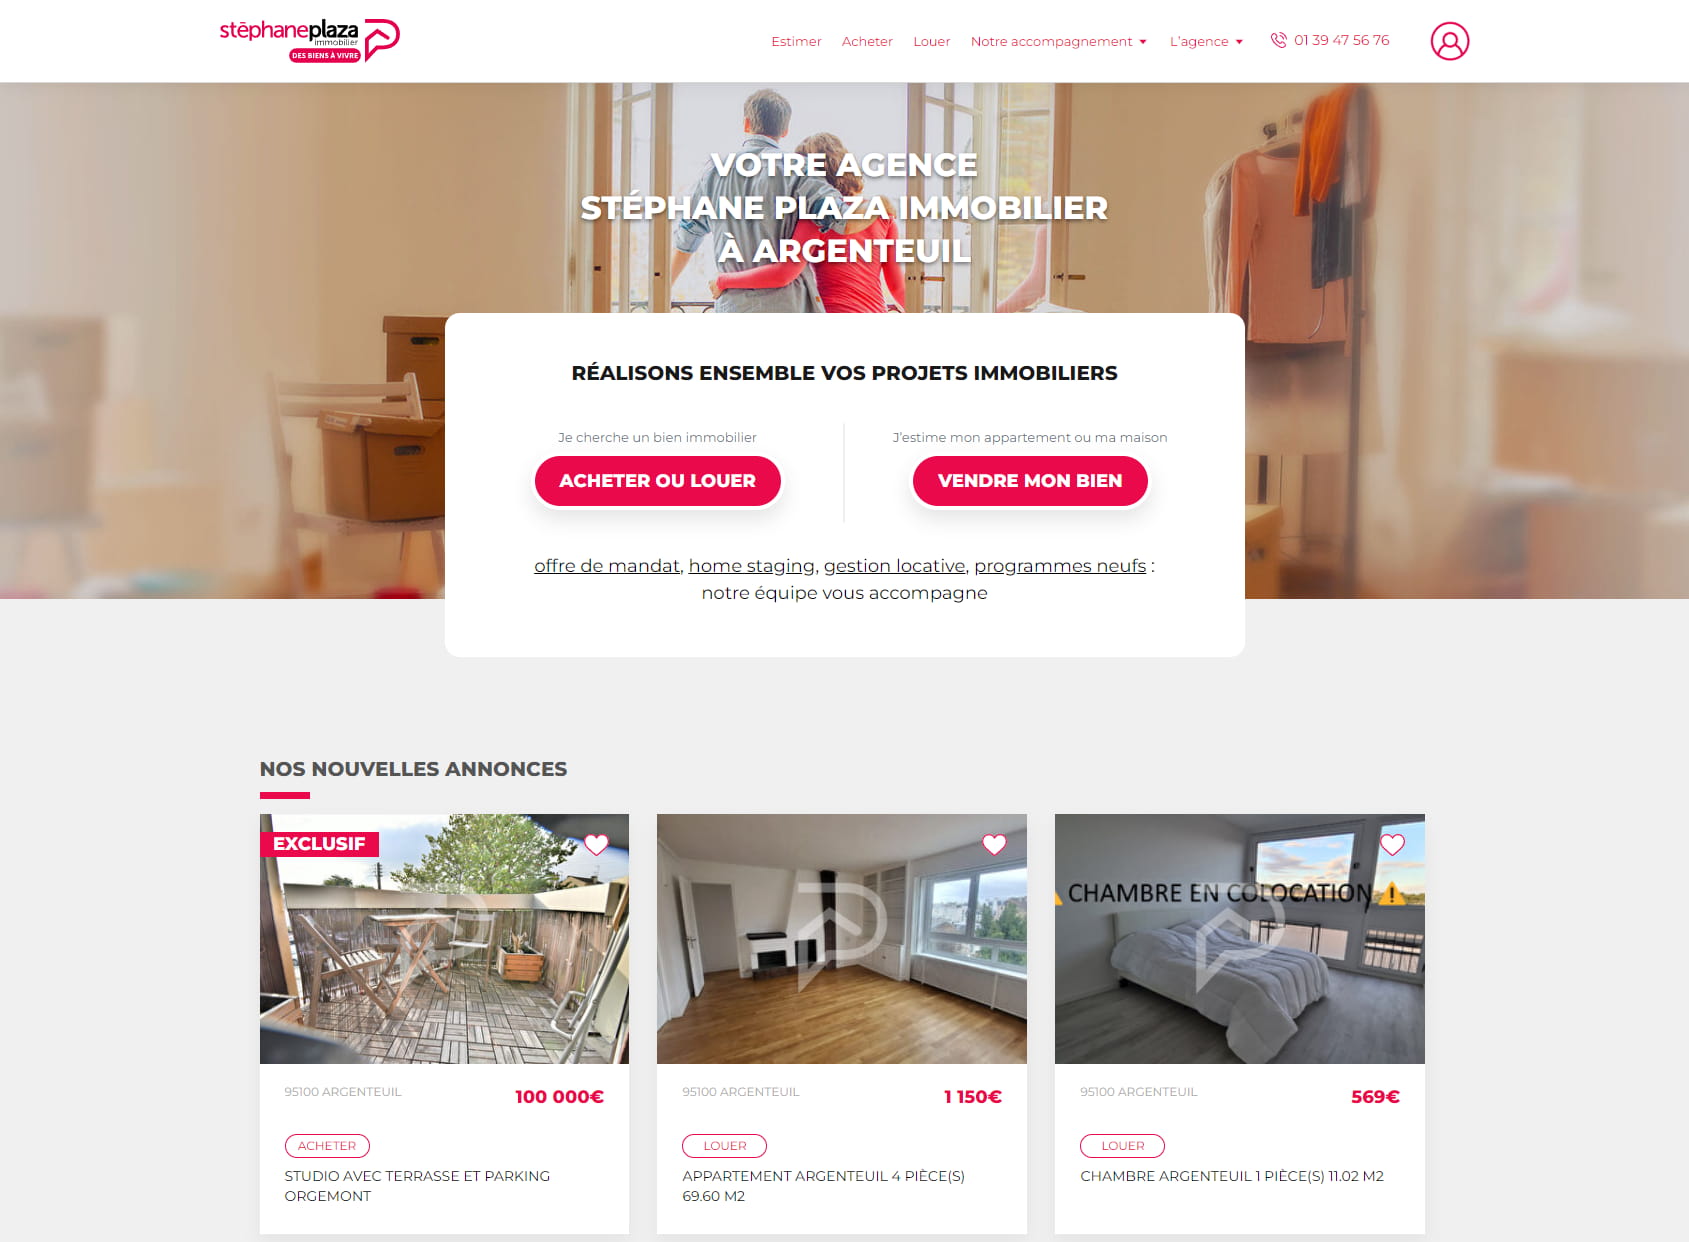 STEPHANE PLAZA IMMOBILIER ARGENTEUIL